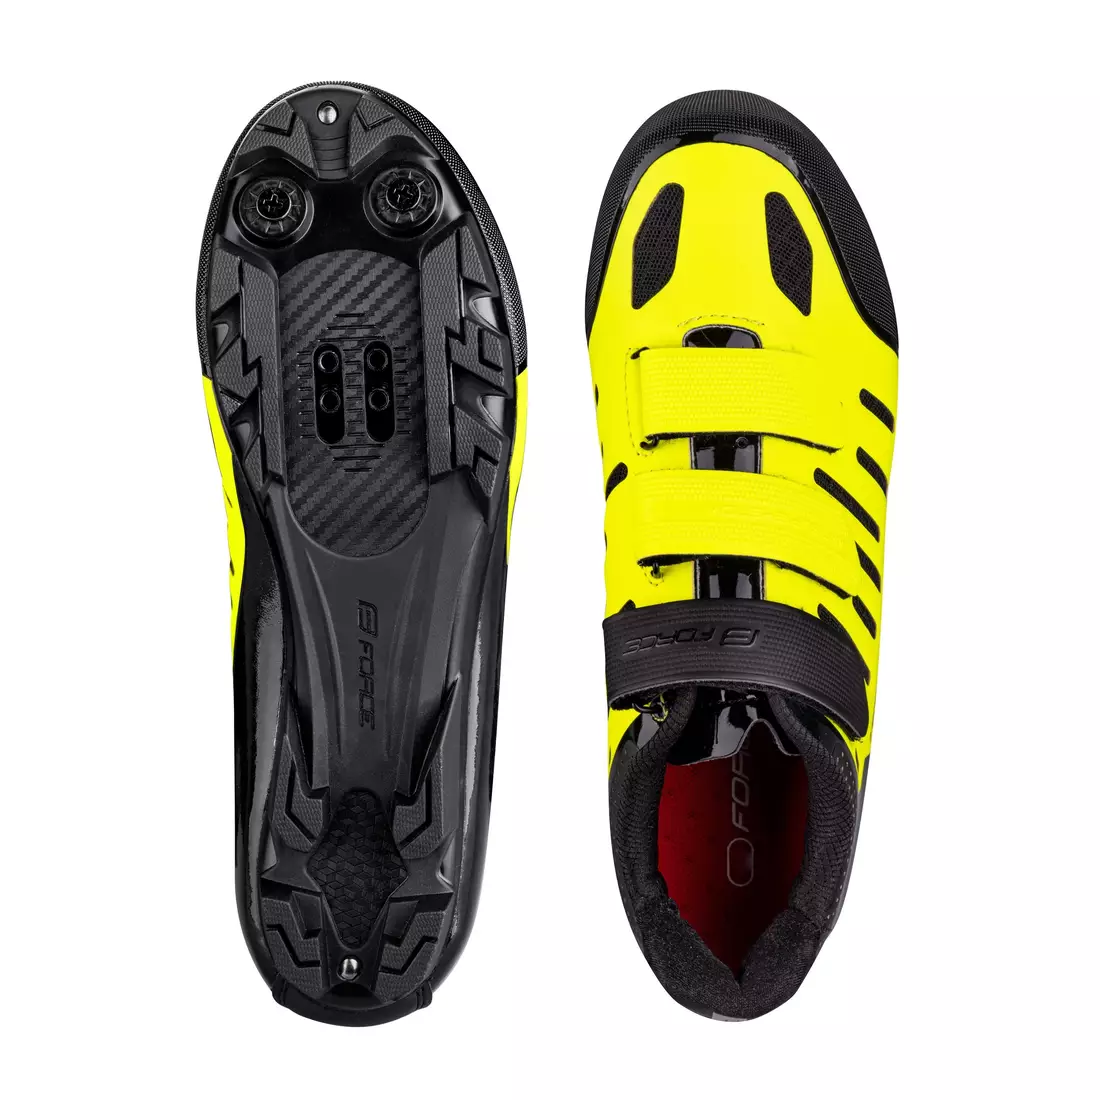 FORCE cycling shoes MTB TEMPO, fluo-black 36 9405736